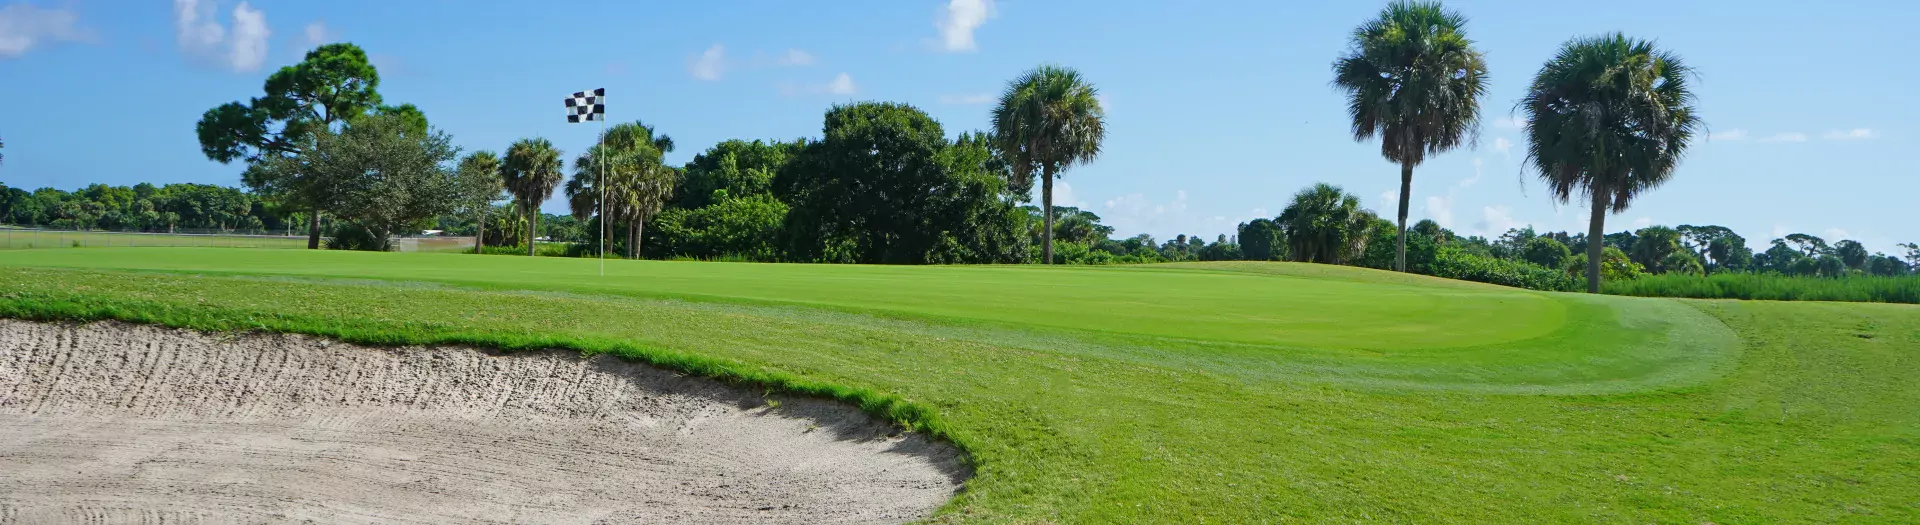 Golf greens of Sailfish Sands Golf Course with bunker